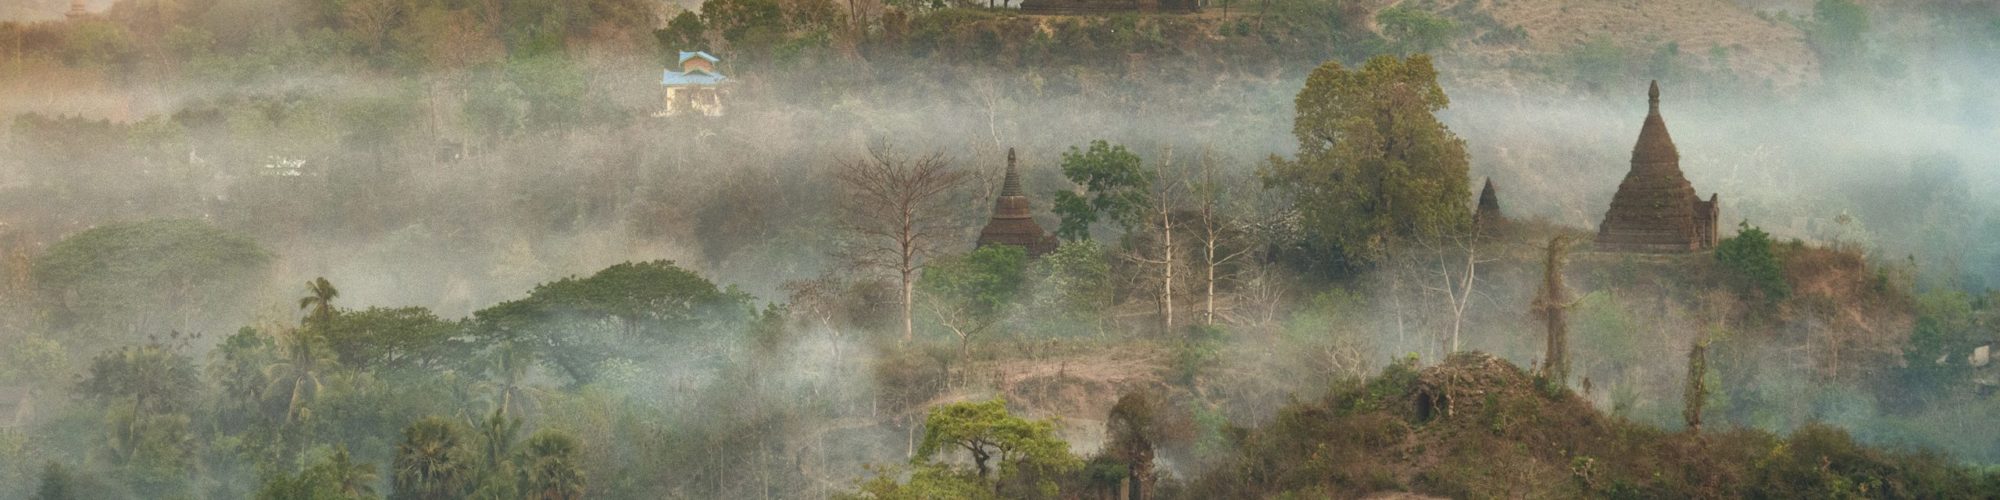 Mrauk U travel agents packages deals